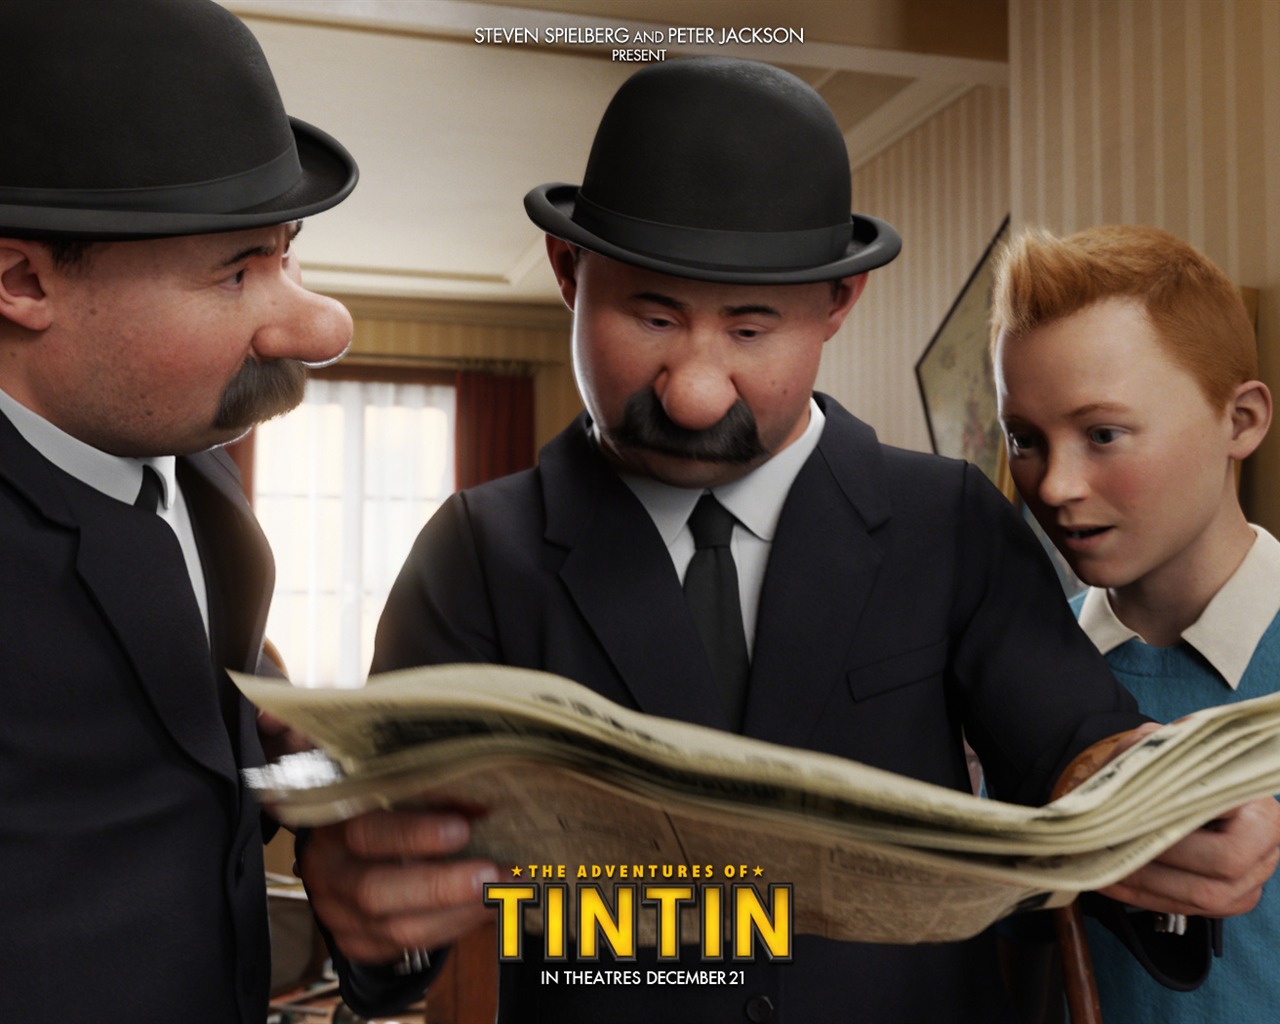 The Adventures of Tintin HD Wallpapers #8 - 1280x1024